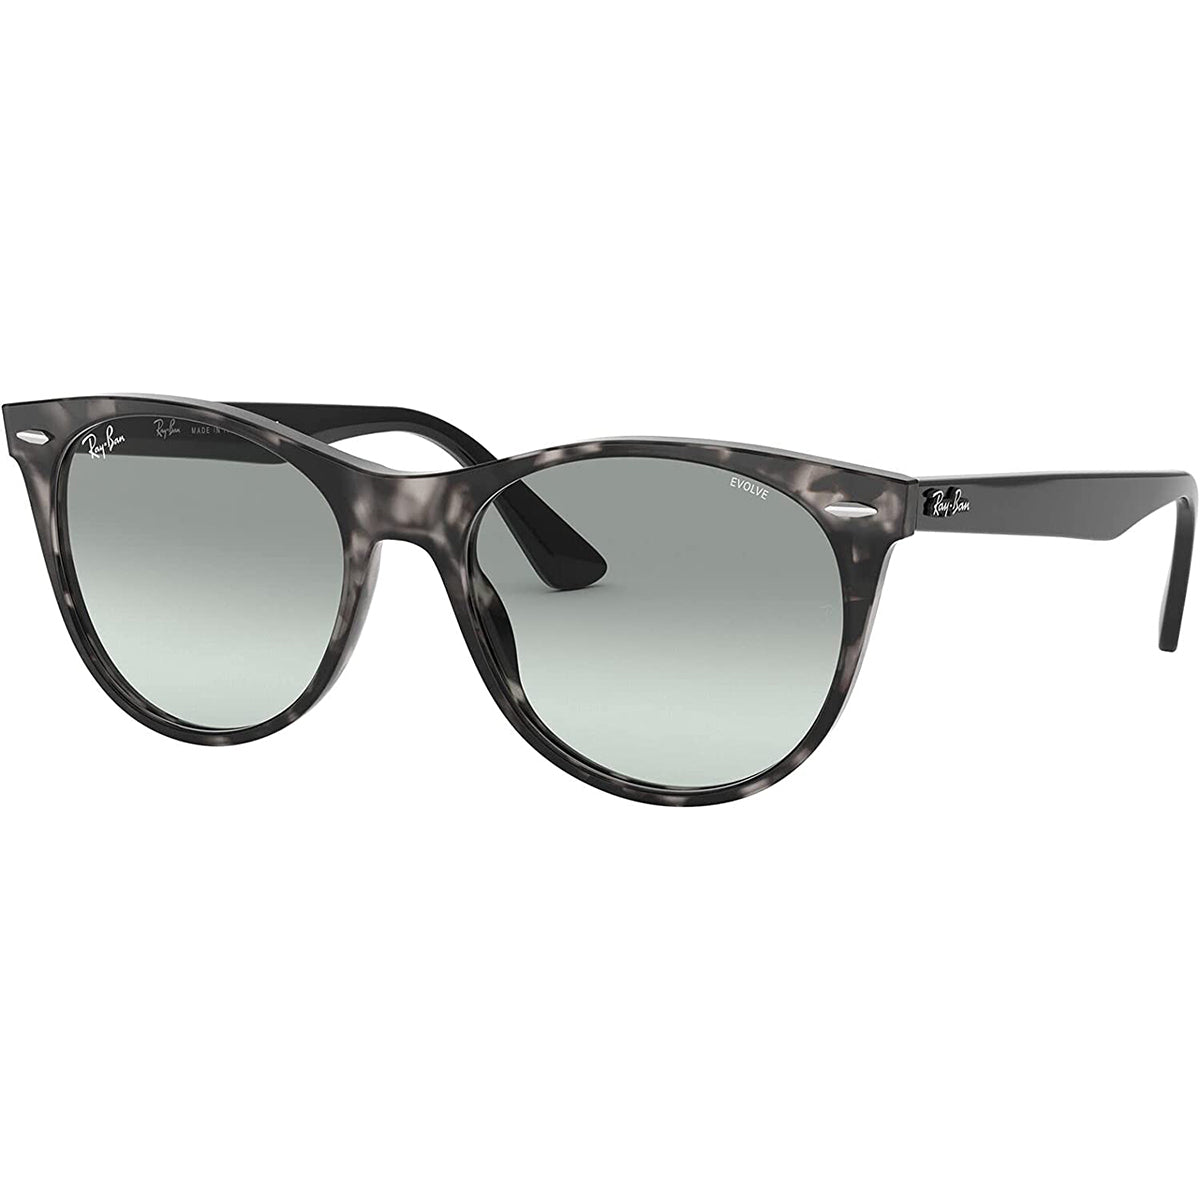 Ray-Ban Sunglasses - RB3449-001/13-59 - LifeStyle Collection